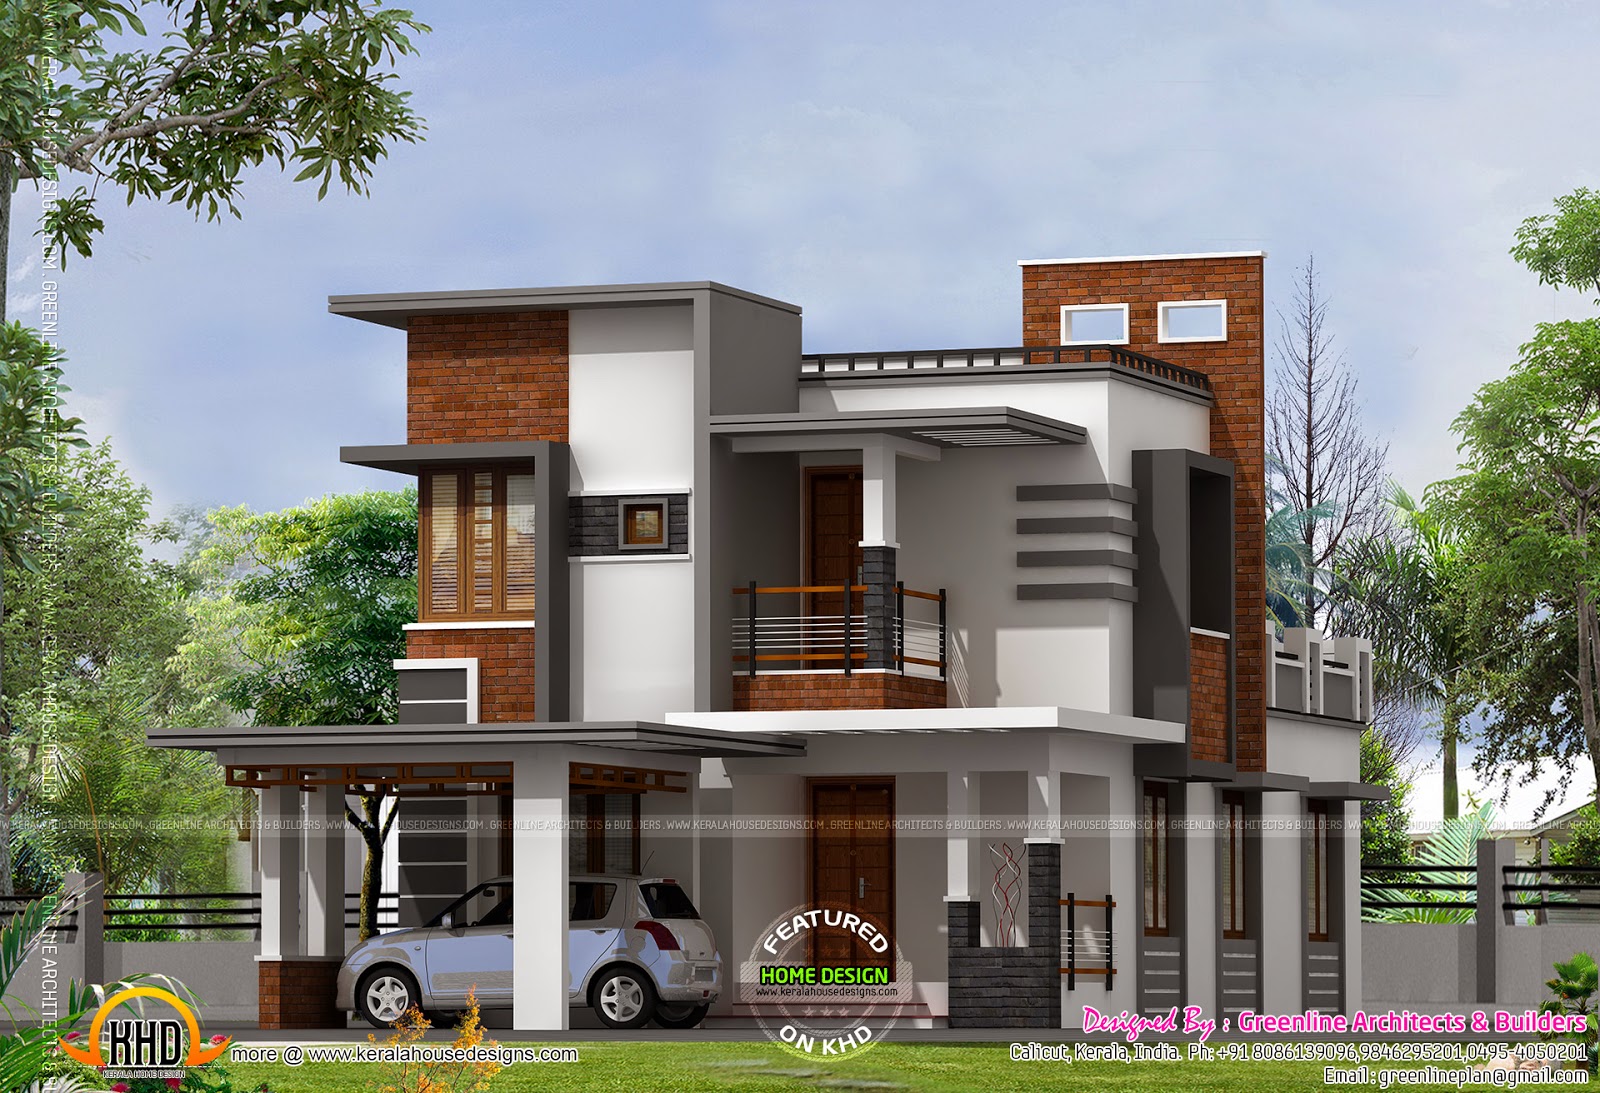  House  Plans  and Design  Low Cost Modern  House  Plans  In Kerala